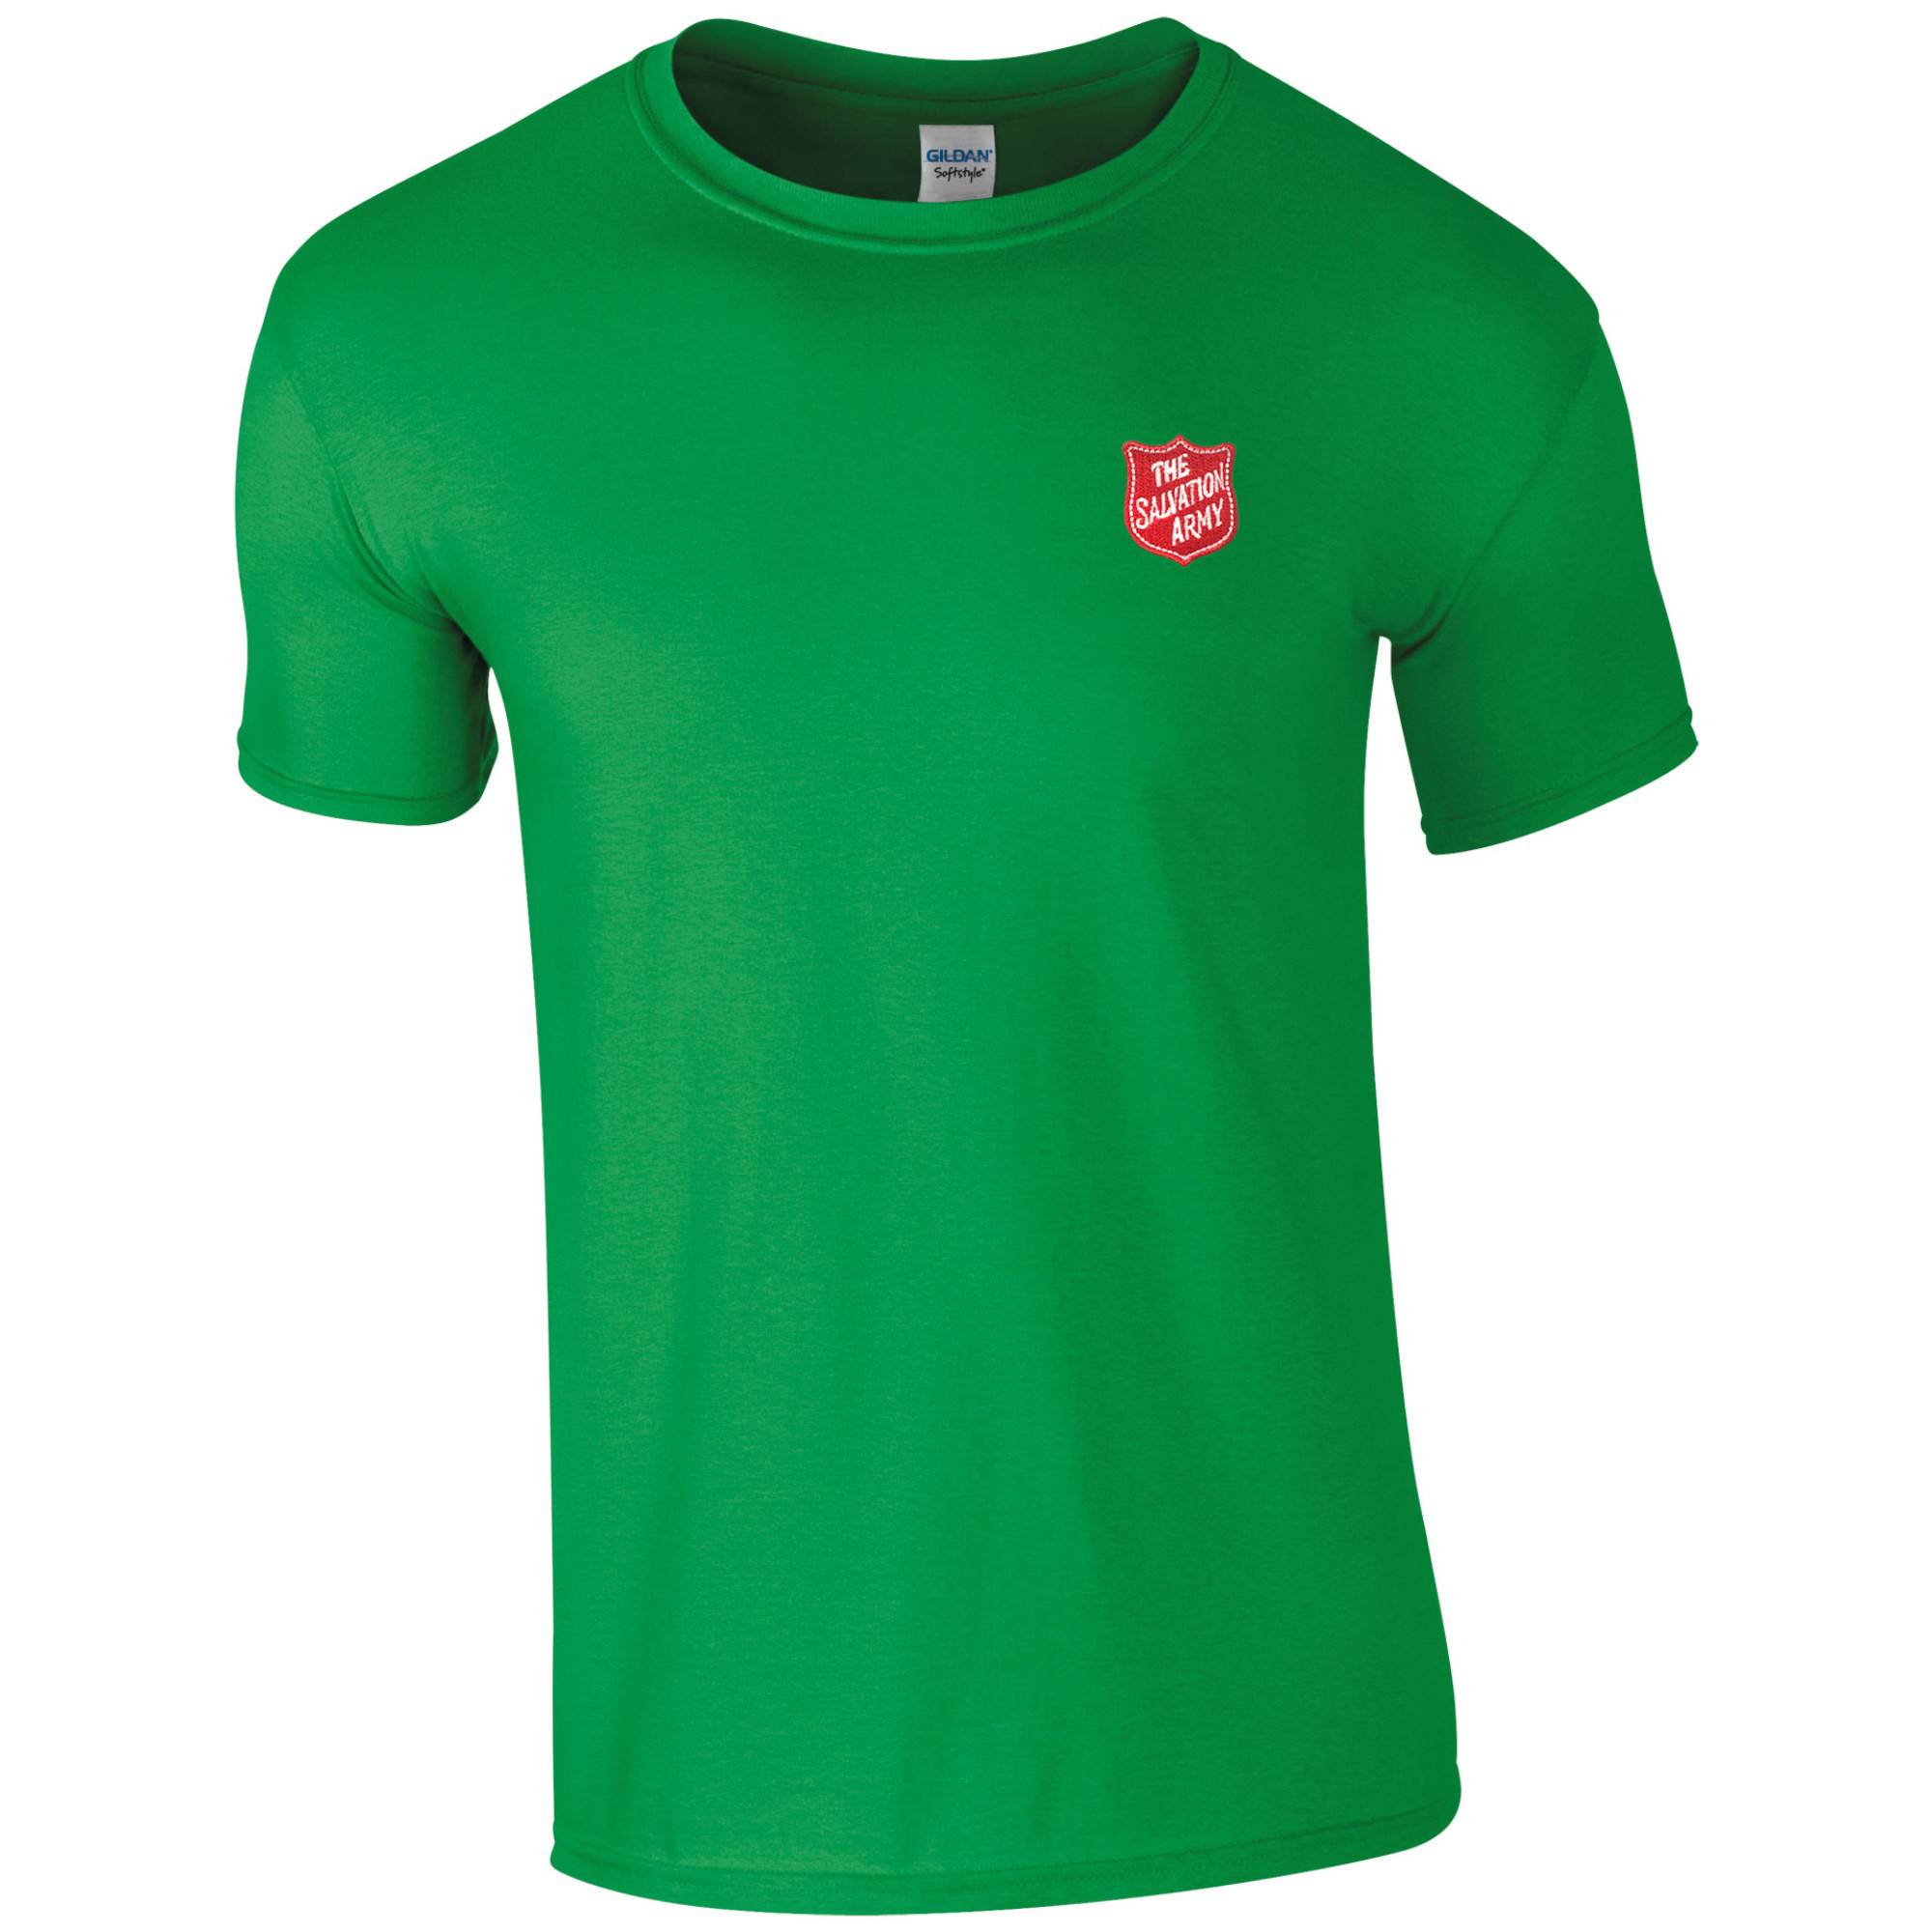 Essentials T Shirt - Green with Shield